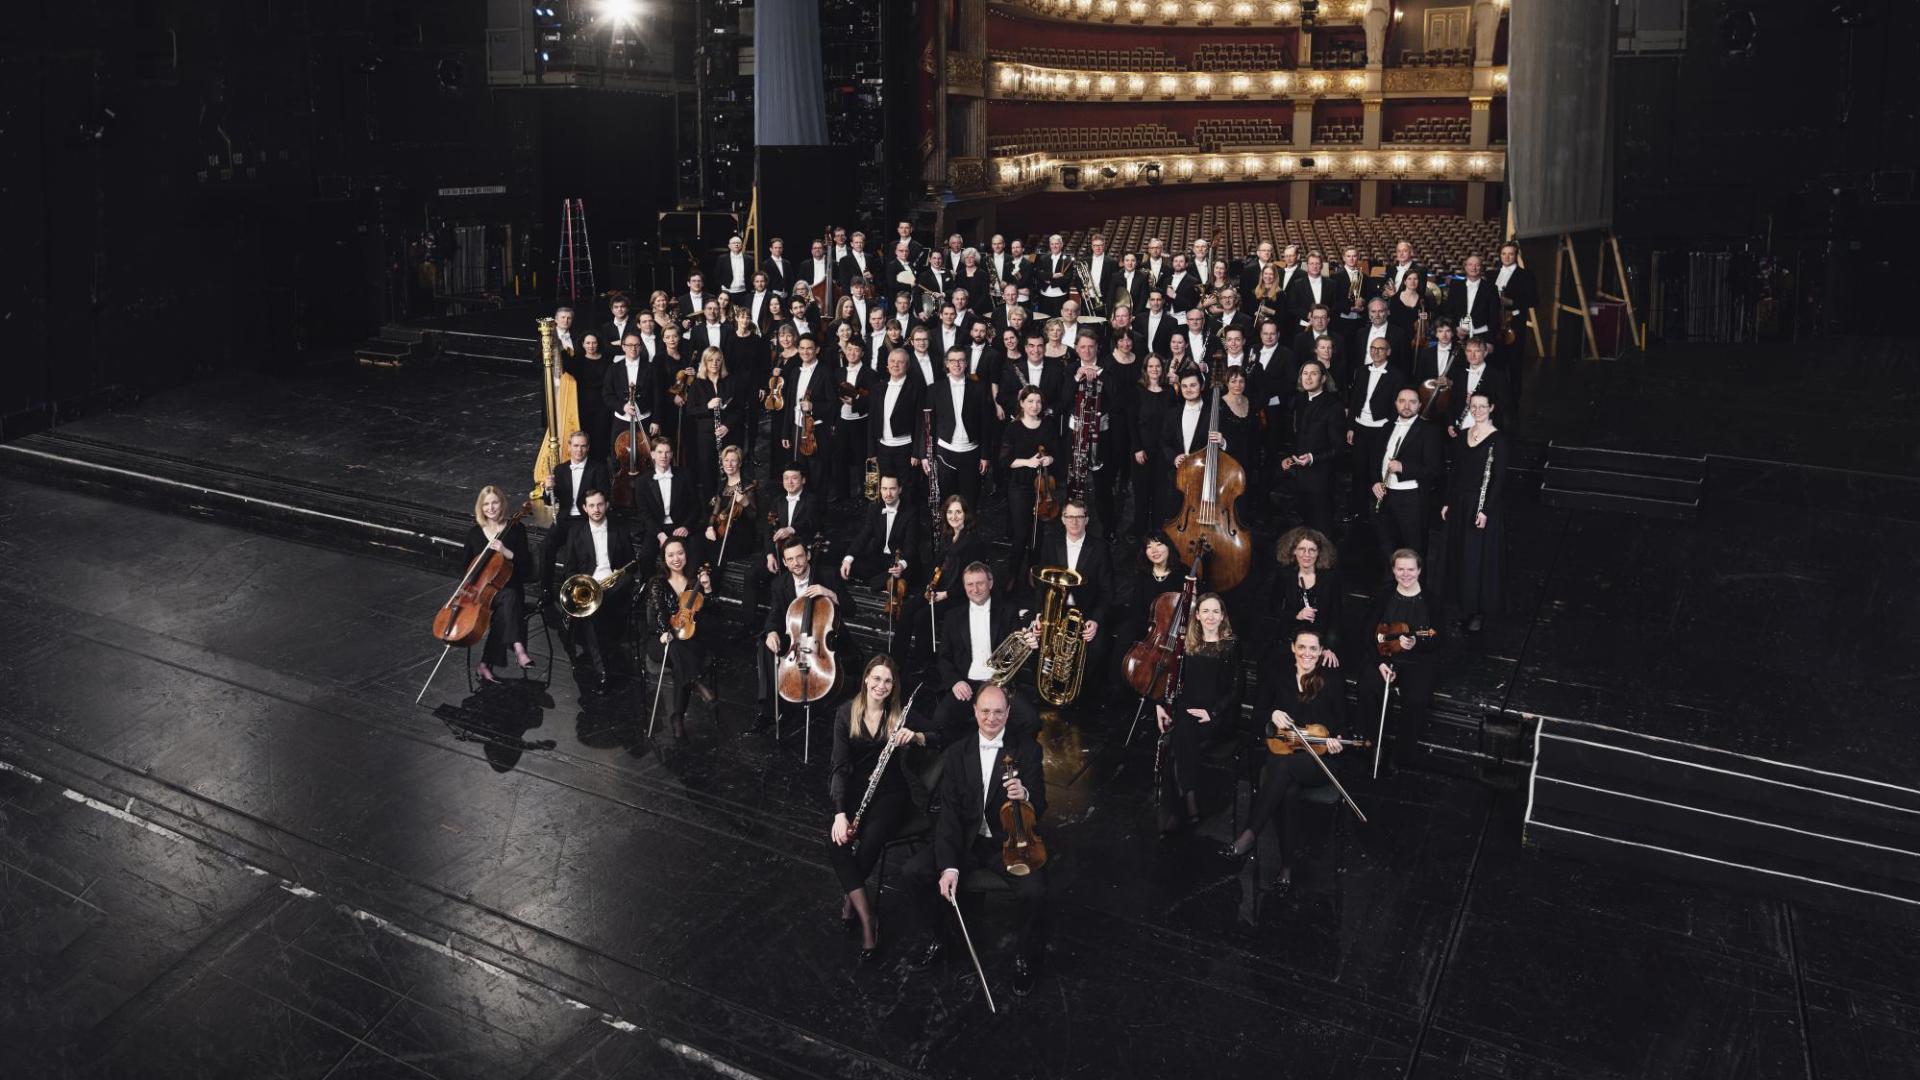 The orchestra is gathered on stage with its instruments.